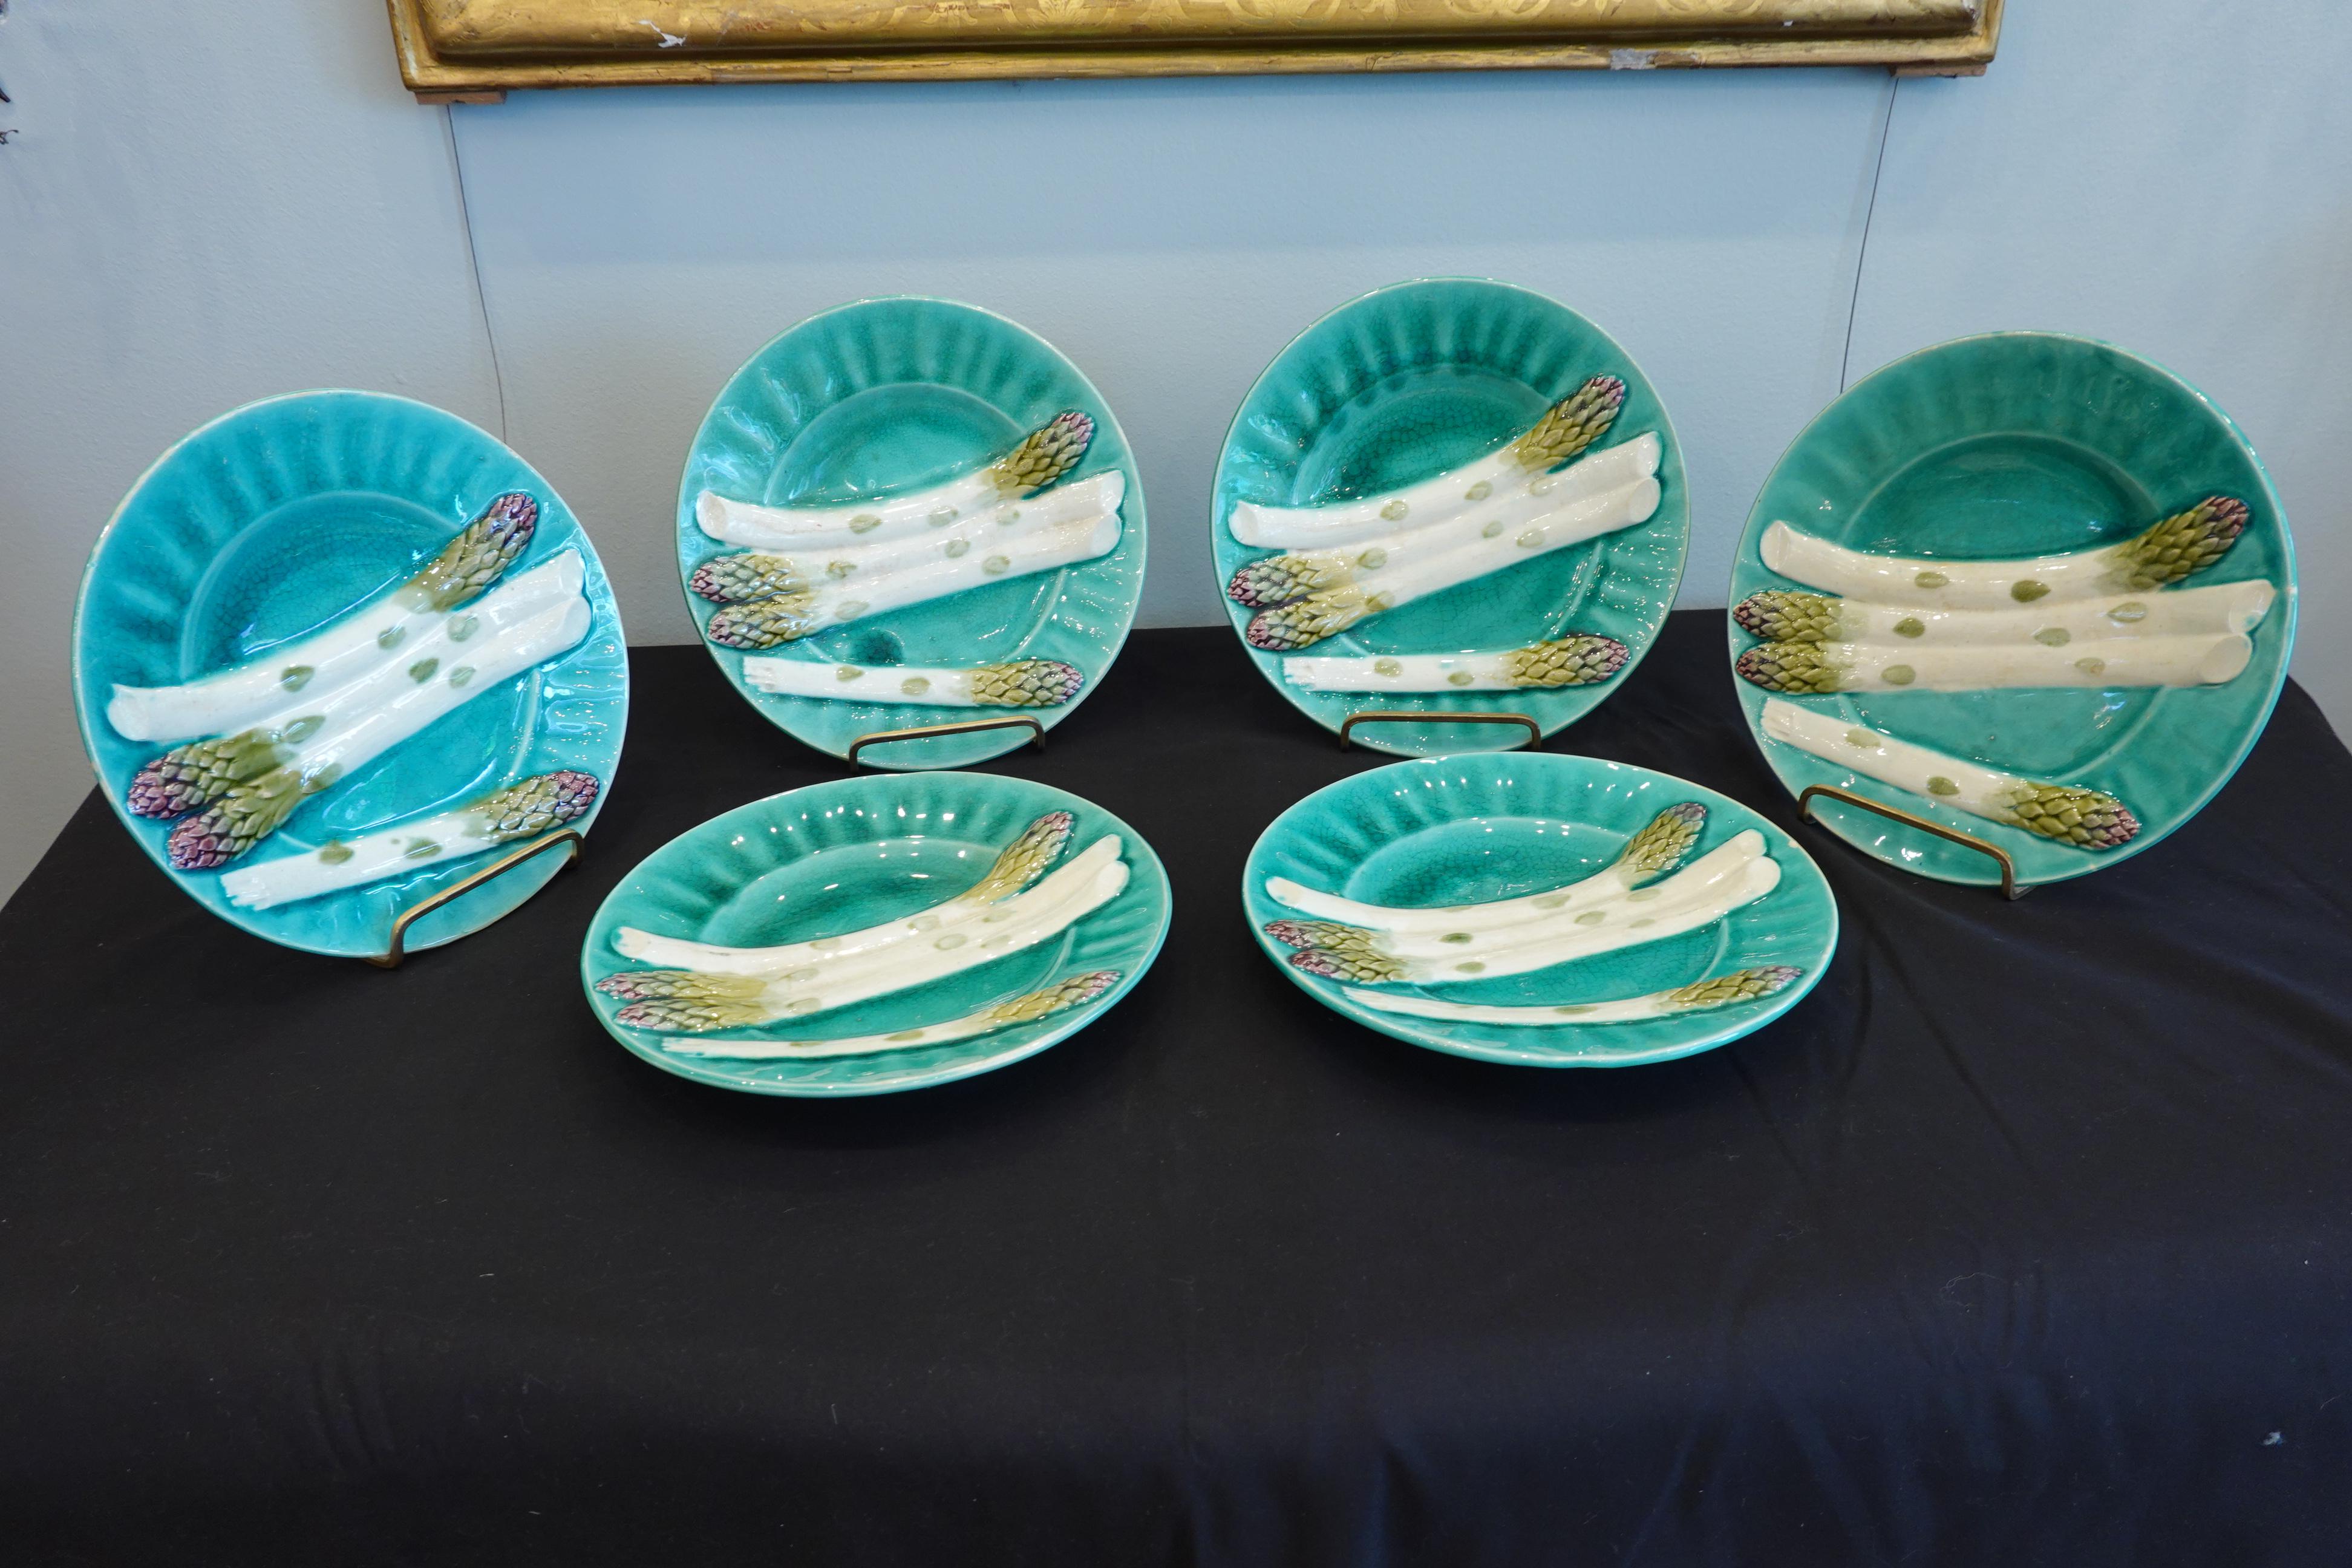 Set of very decorative, late 19th century blue-green French Majolica asparagus plates, hand-painted in white, green and purple, showing four asparagus spears in relief, and with fluted rims. The underside is stamped 